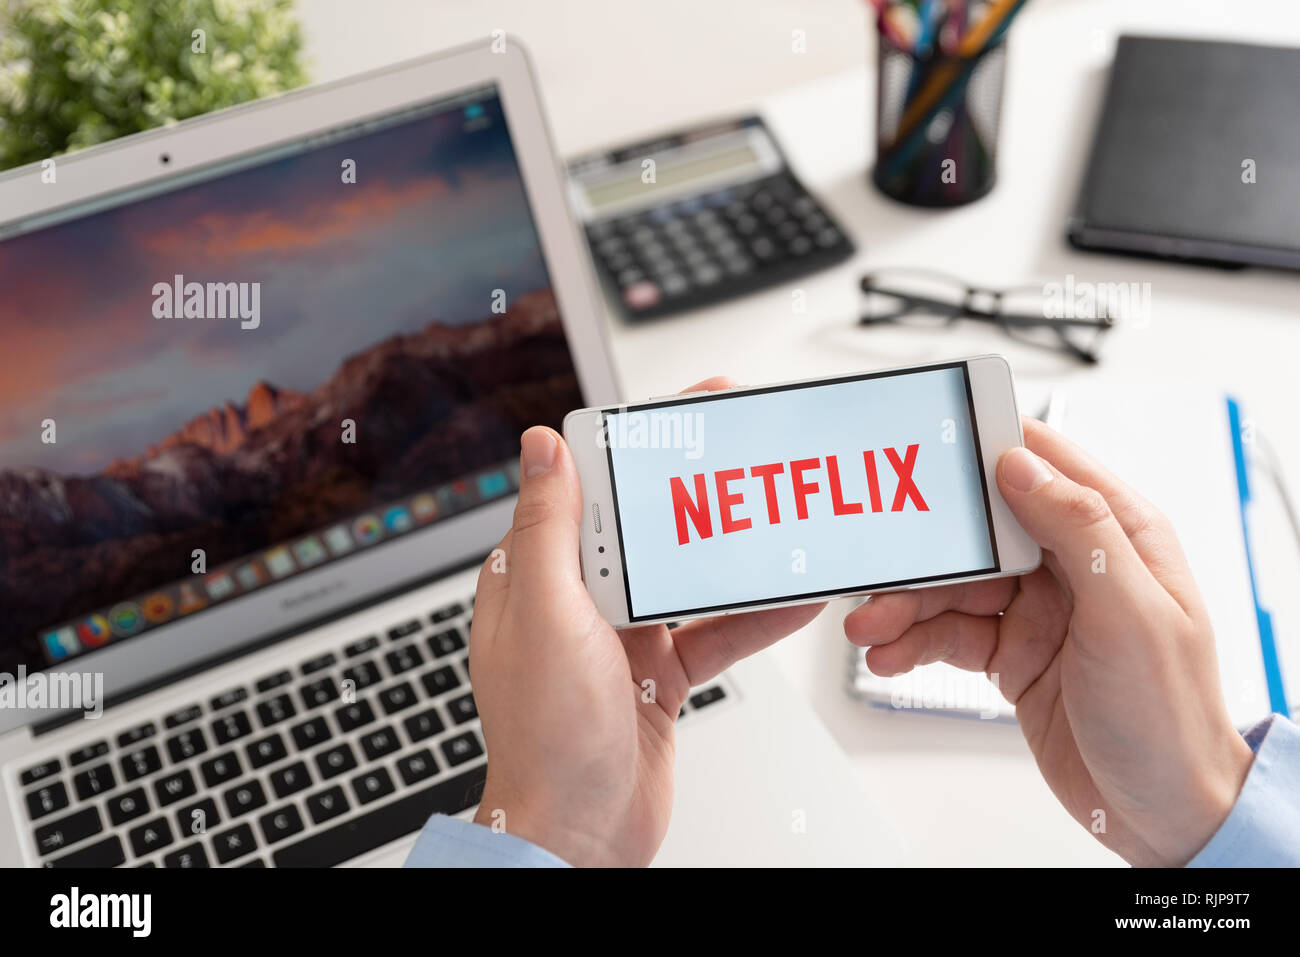 Wroclaw, Poland - JAN 31, 2019: Man holding smartphone with Netflix logo. Netflix is a global provider of streaming movies and TV series Stock Photo